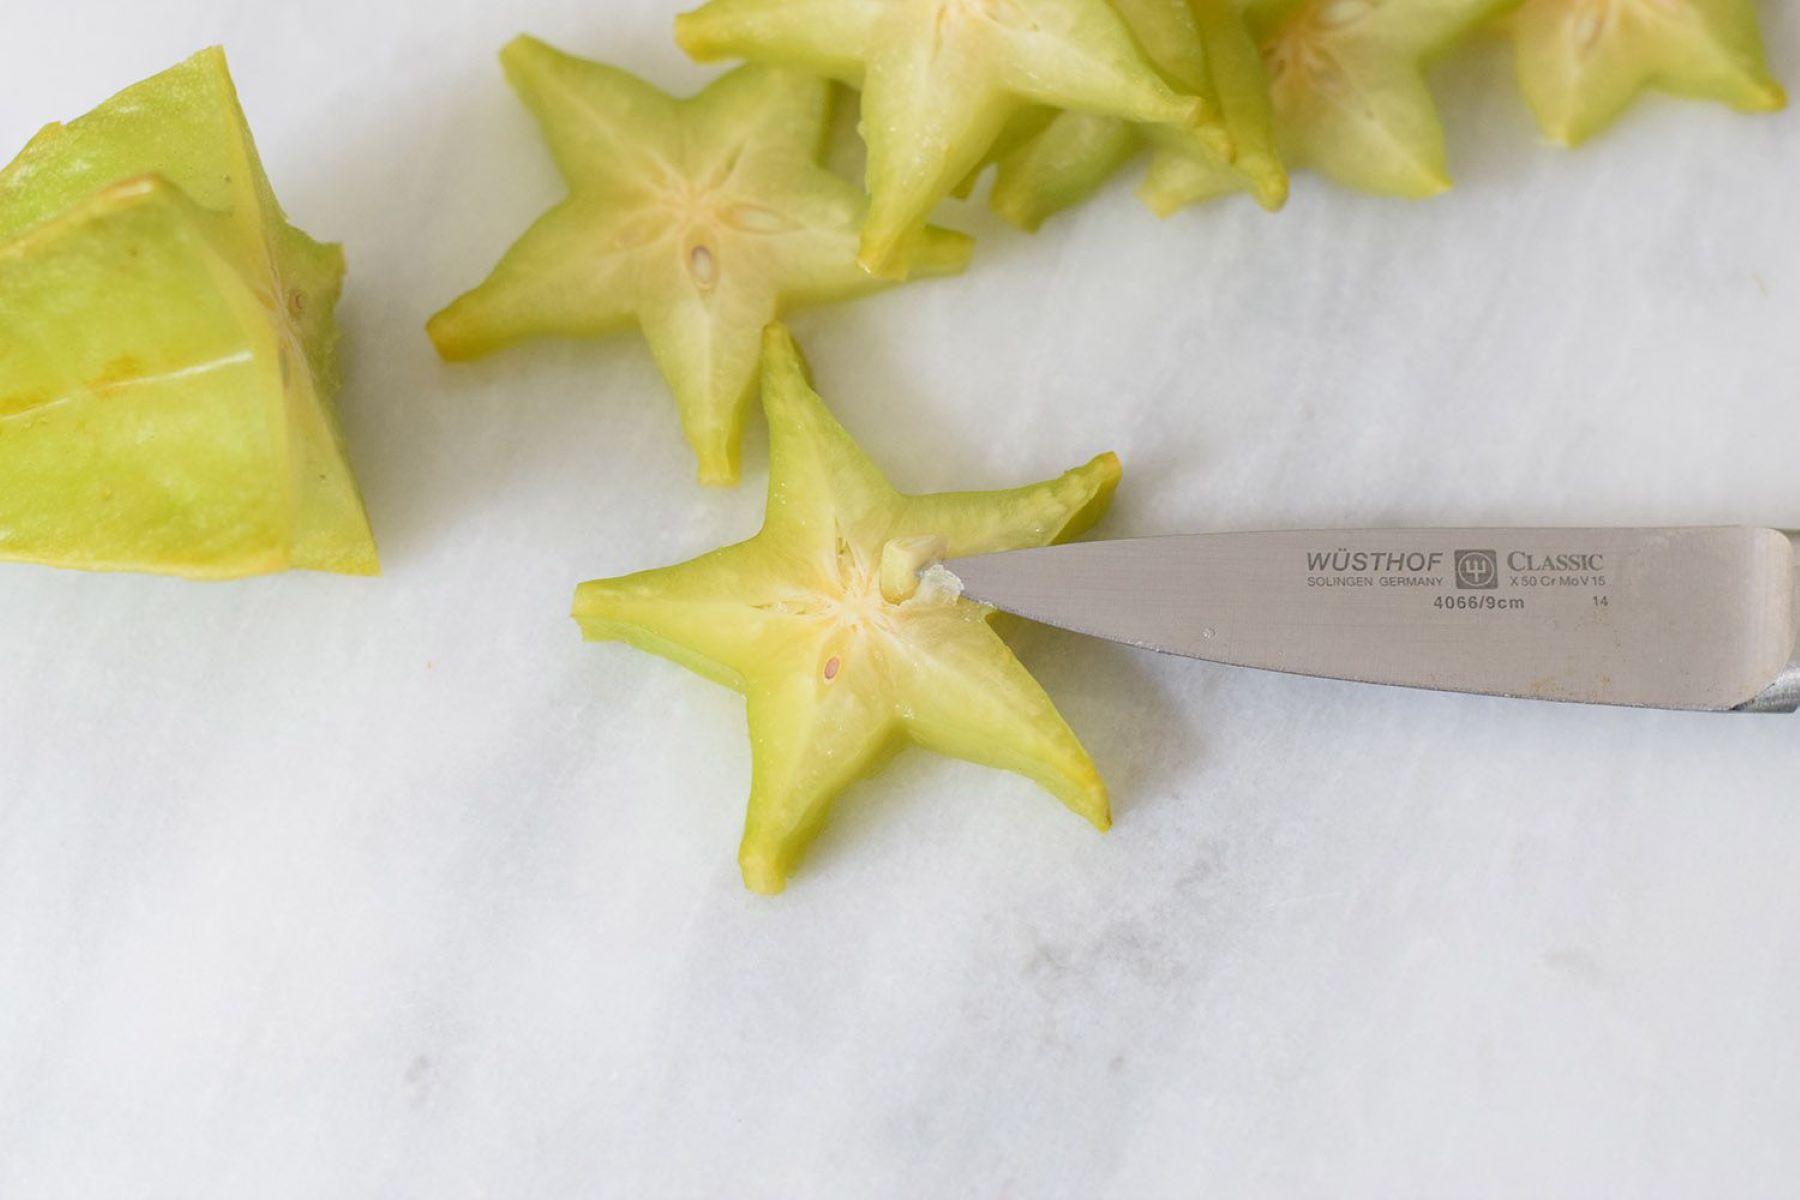 How To Store Star Fruit